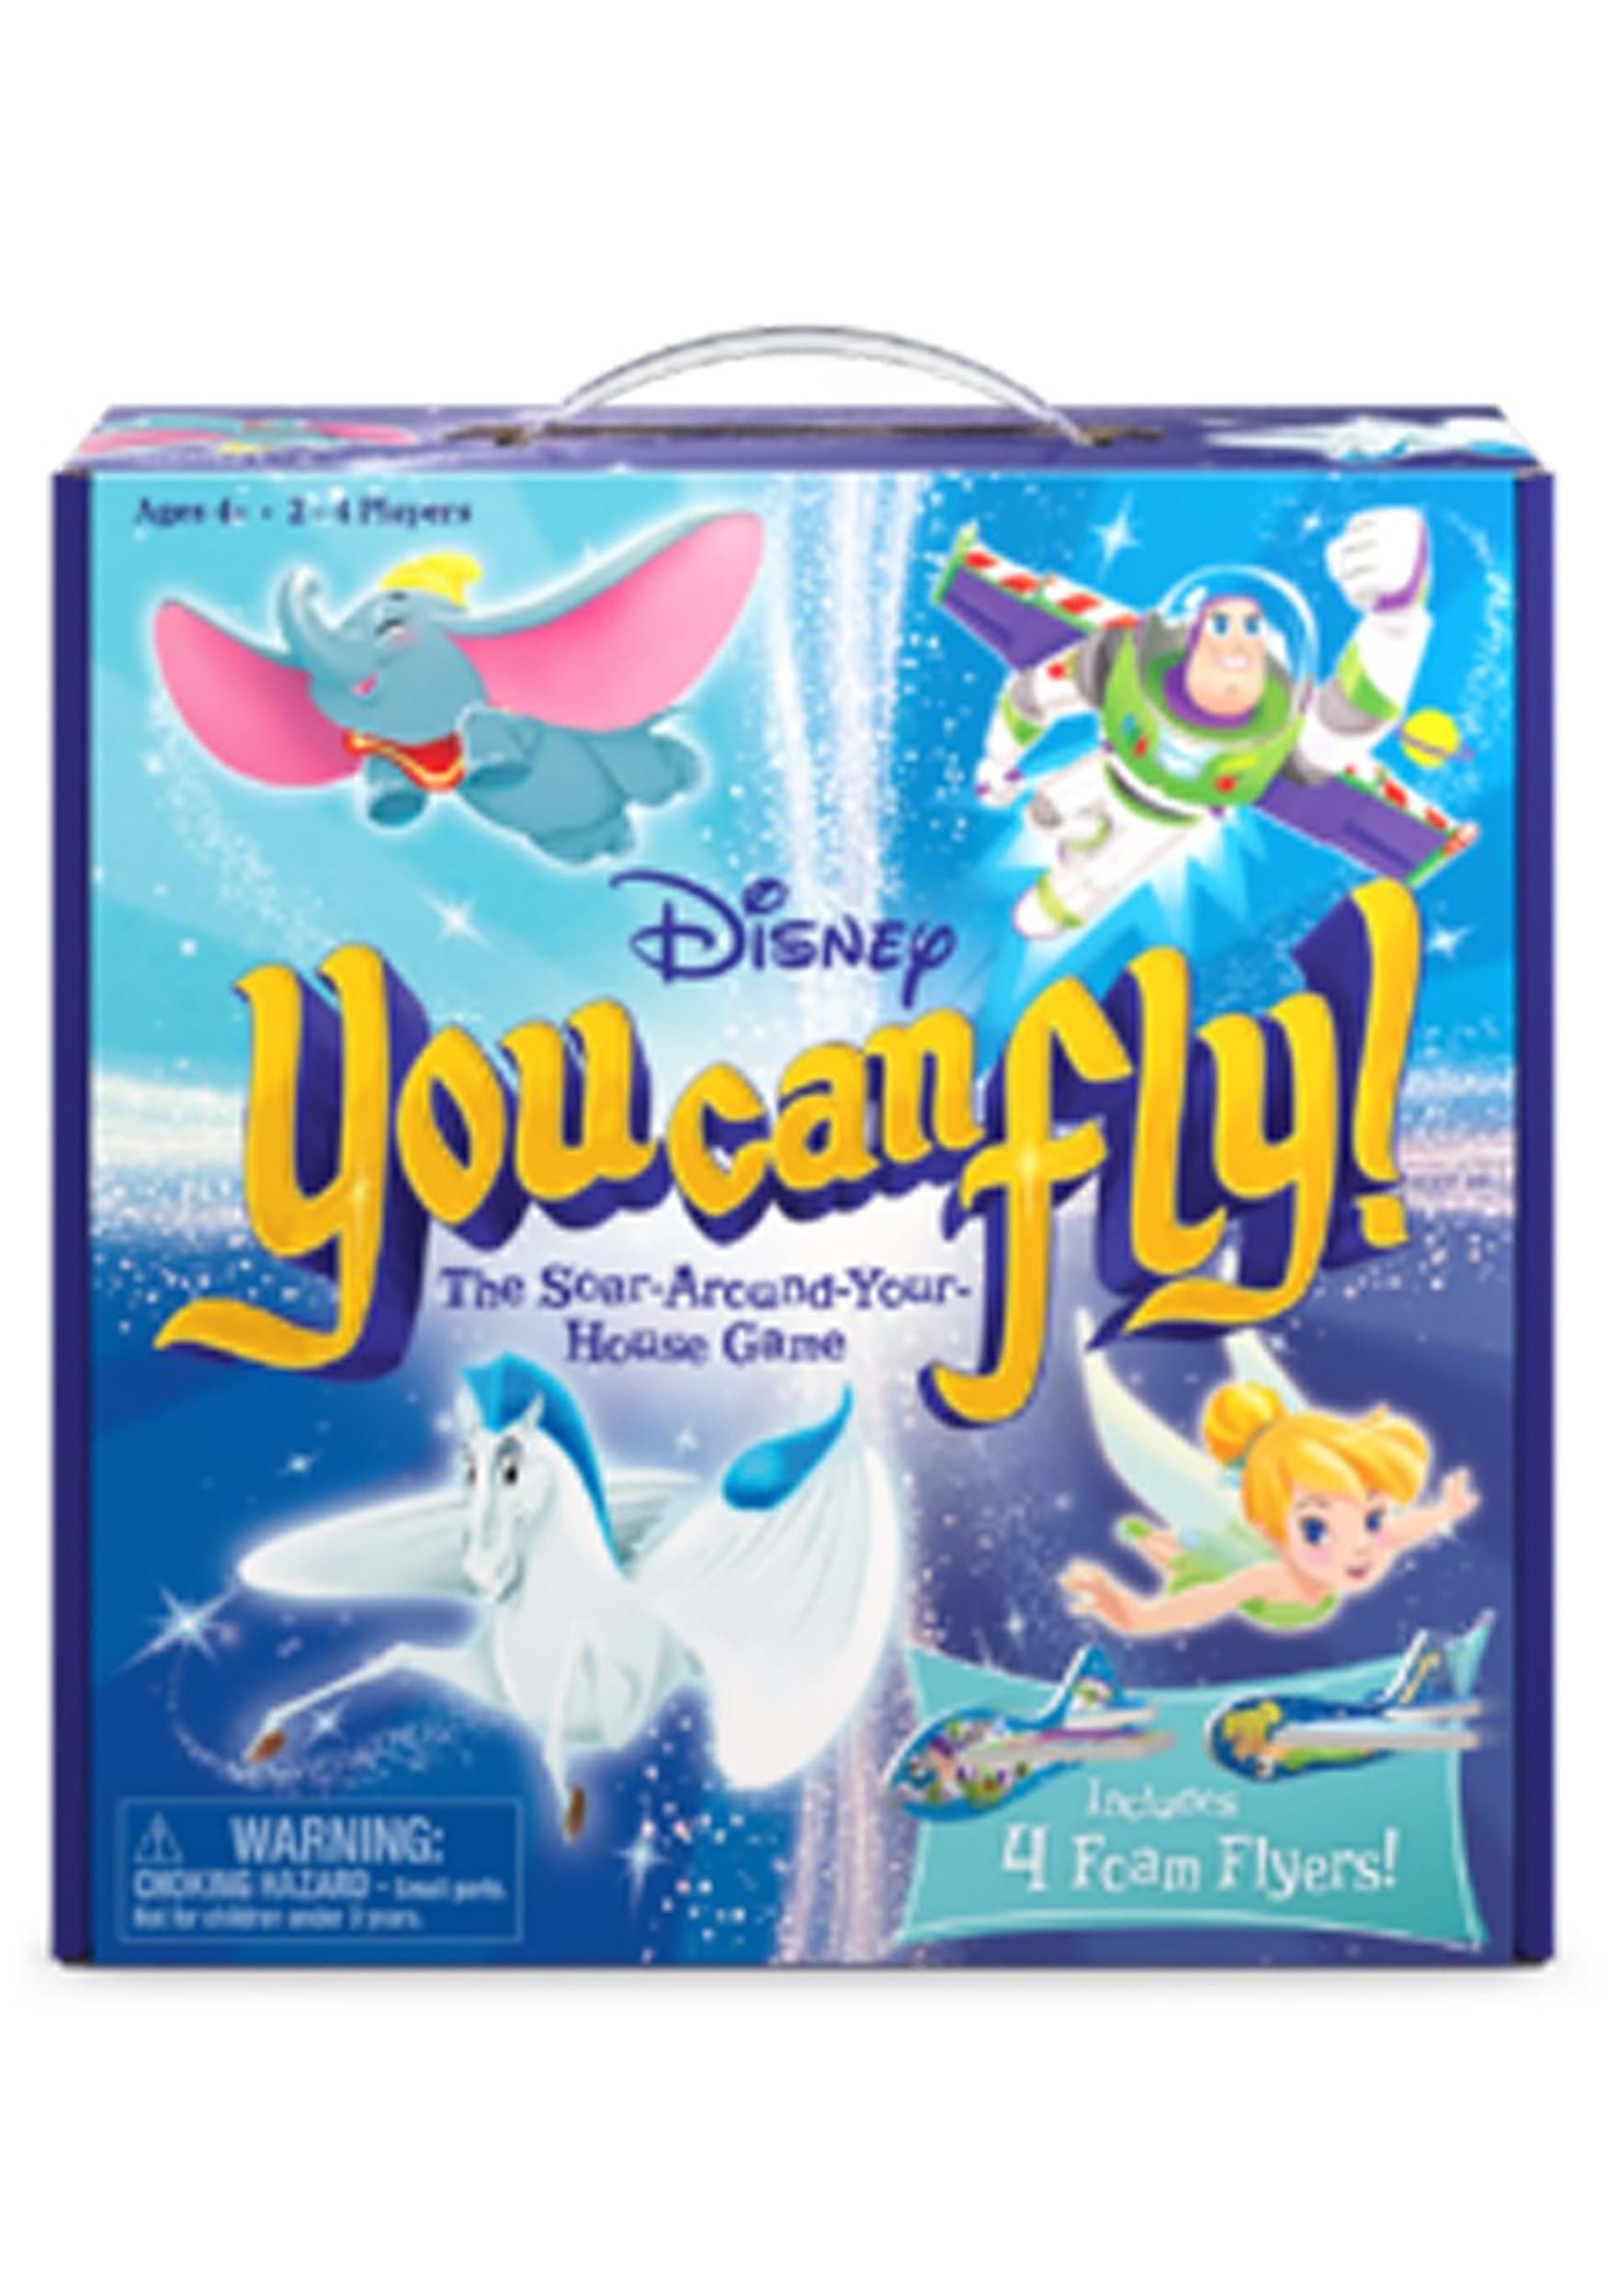 Signature Disney You Can Fly Games!